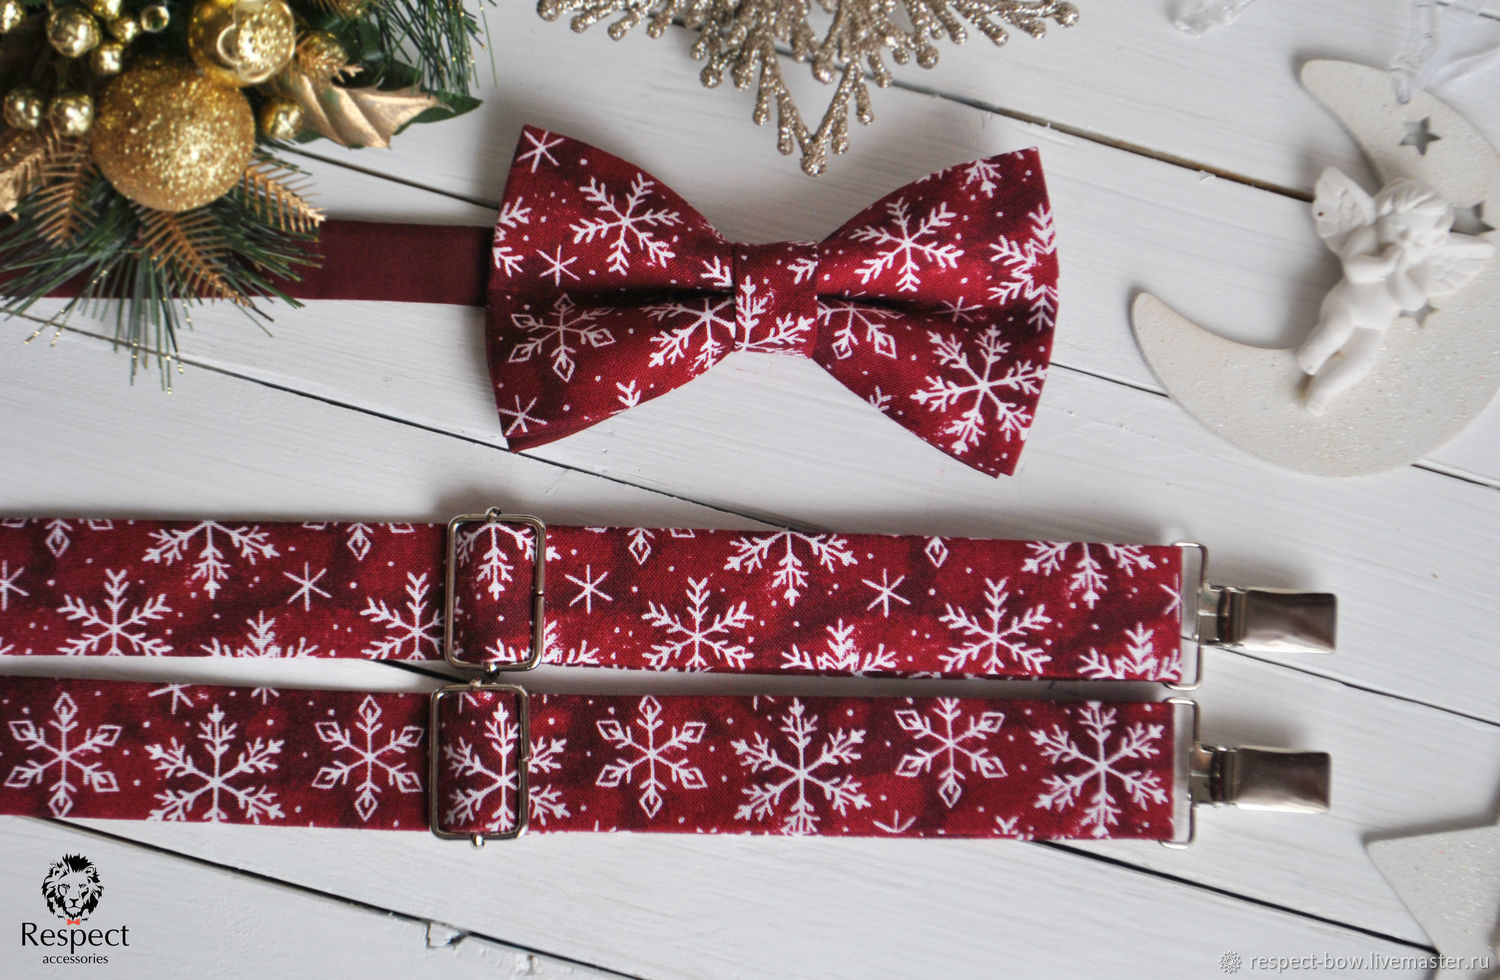 A Burgundy bow tie Marsala with Snowflake pattern plete with Burgundy suspenders